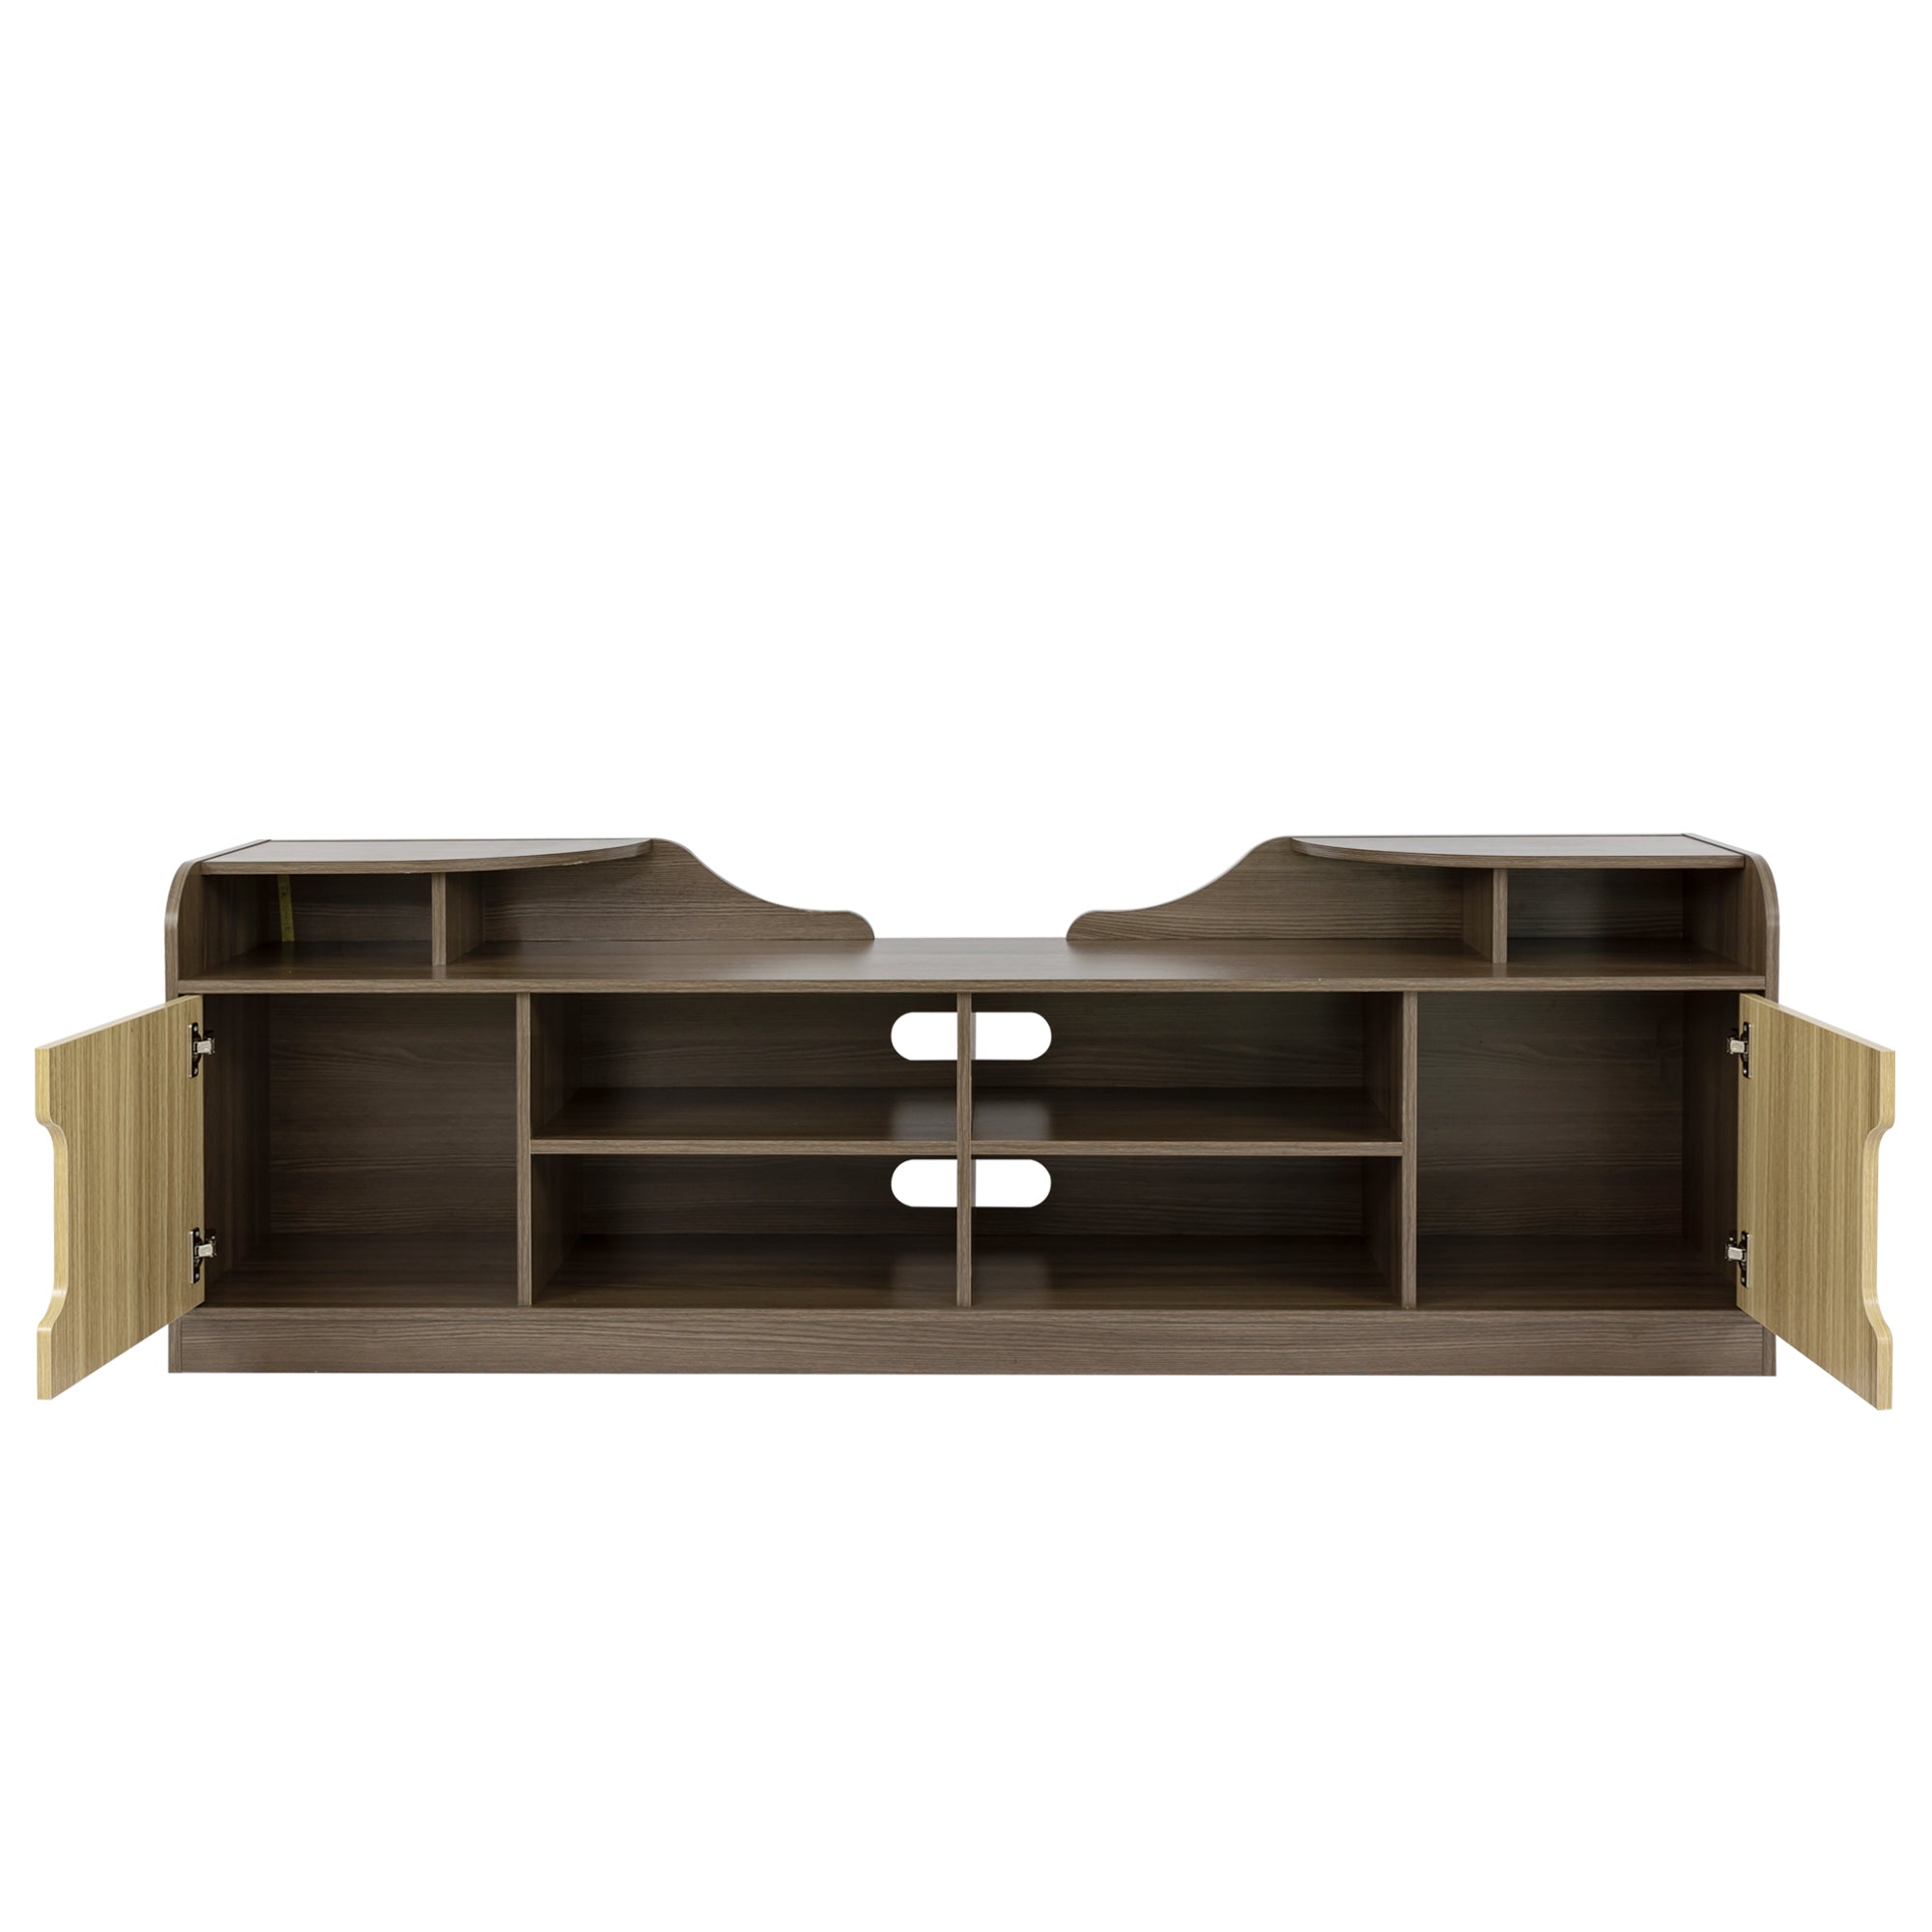 70.87” Modern TV Stand with High Glossy Front TV Cabinet for Lounge Room, Living Room & Bedroom, Beige+Brown